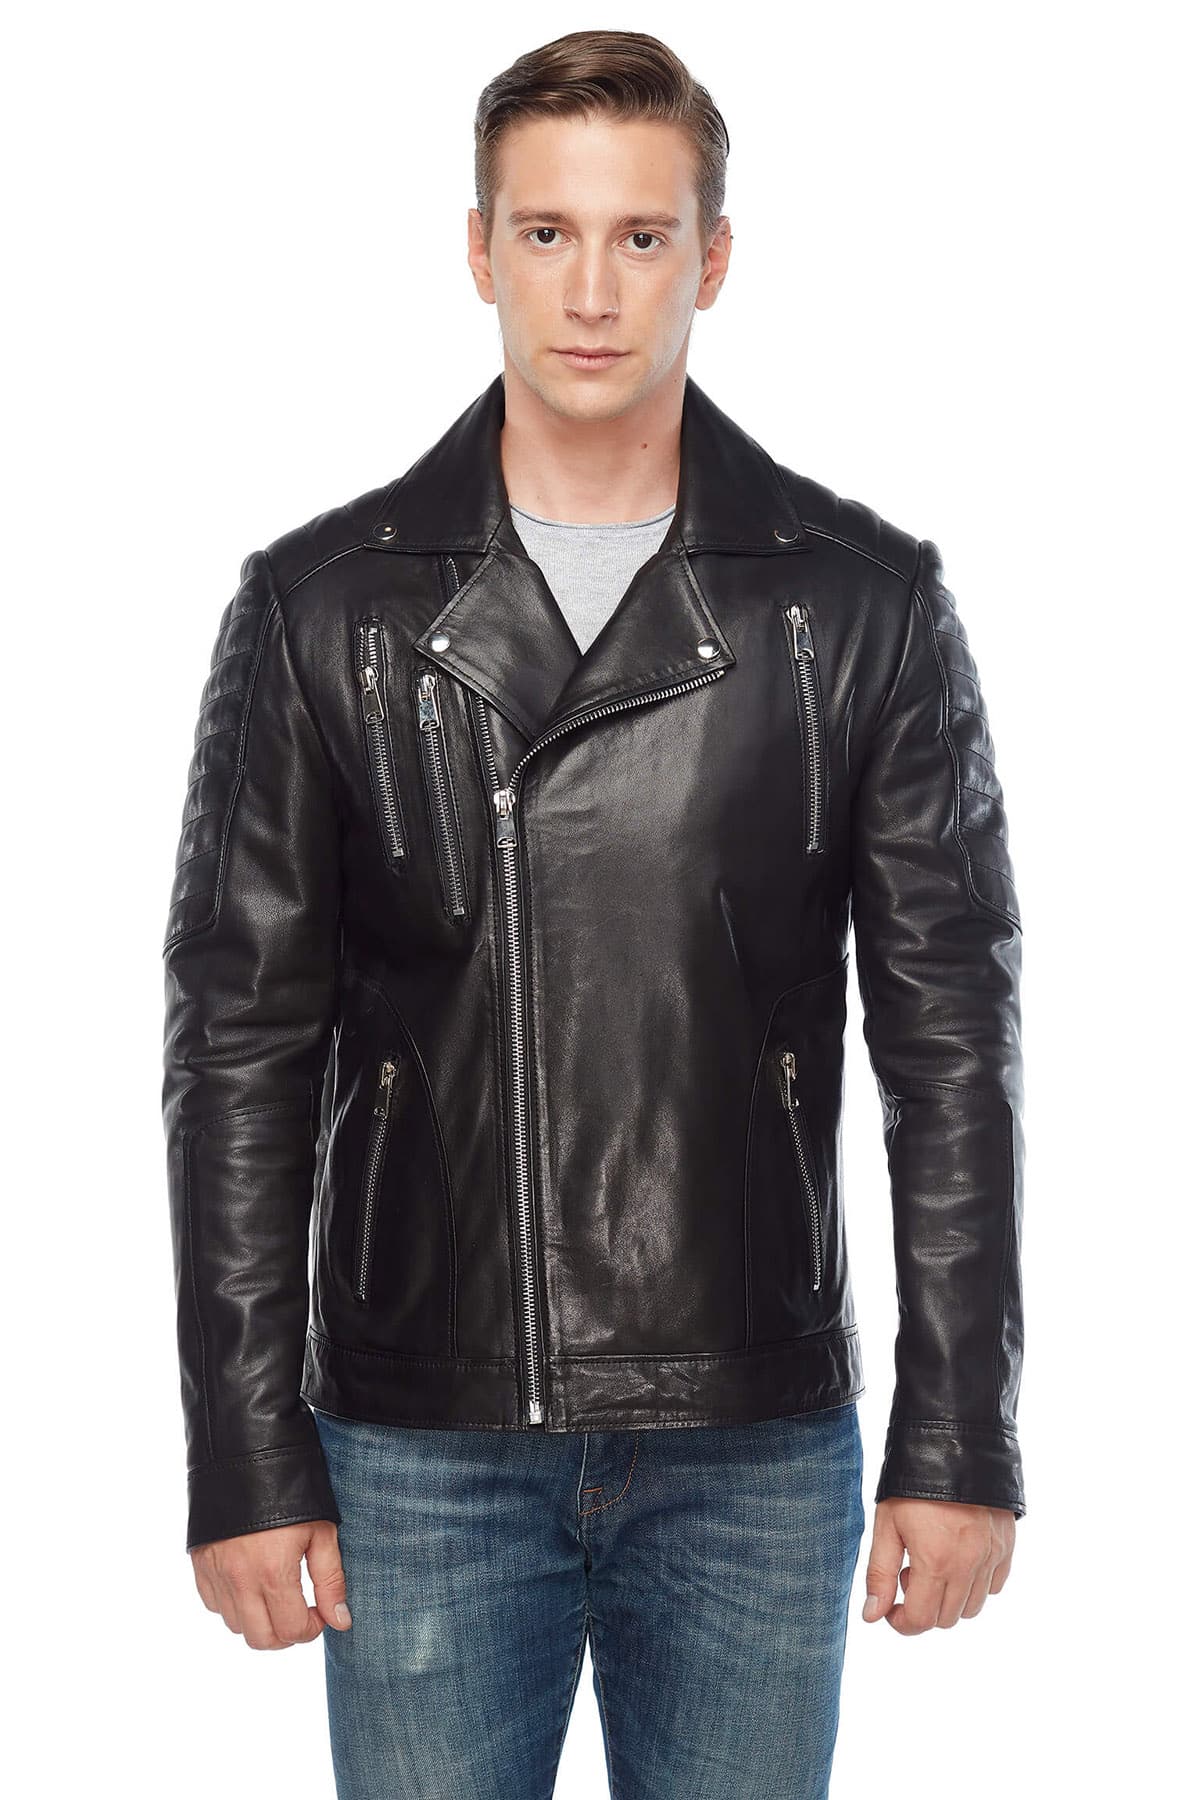 You've Searched for Mens Real Leather Motorcycle Jacket Black